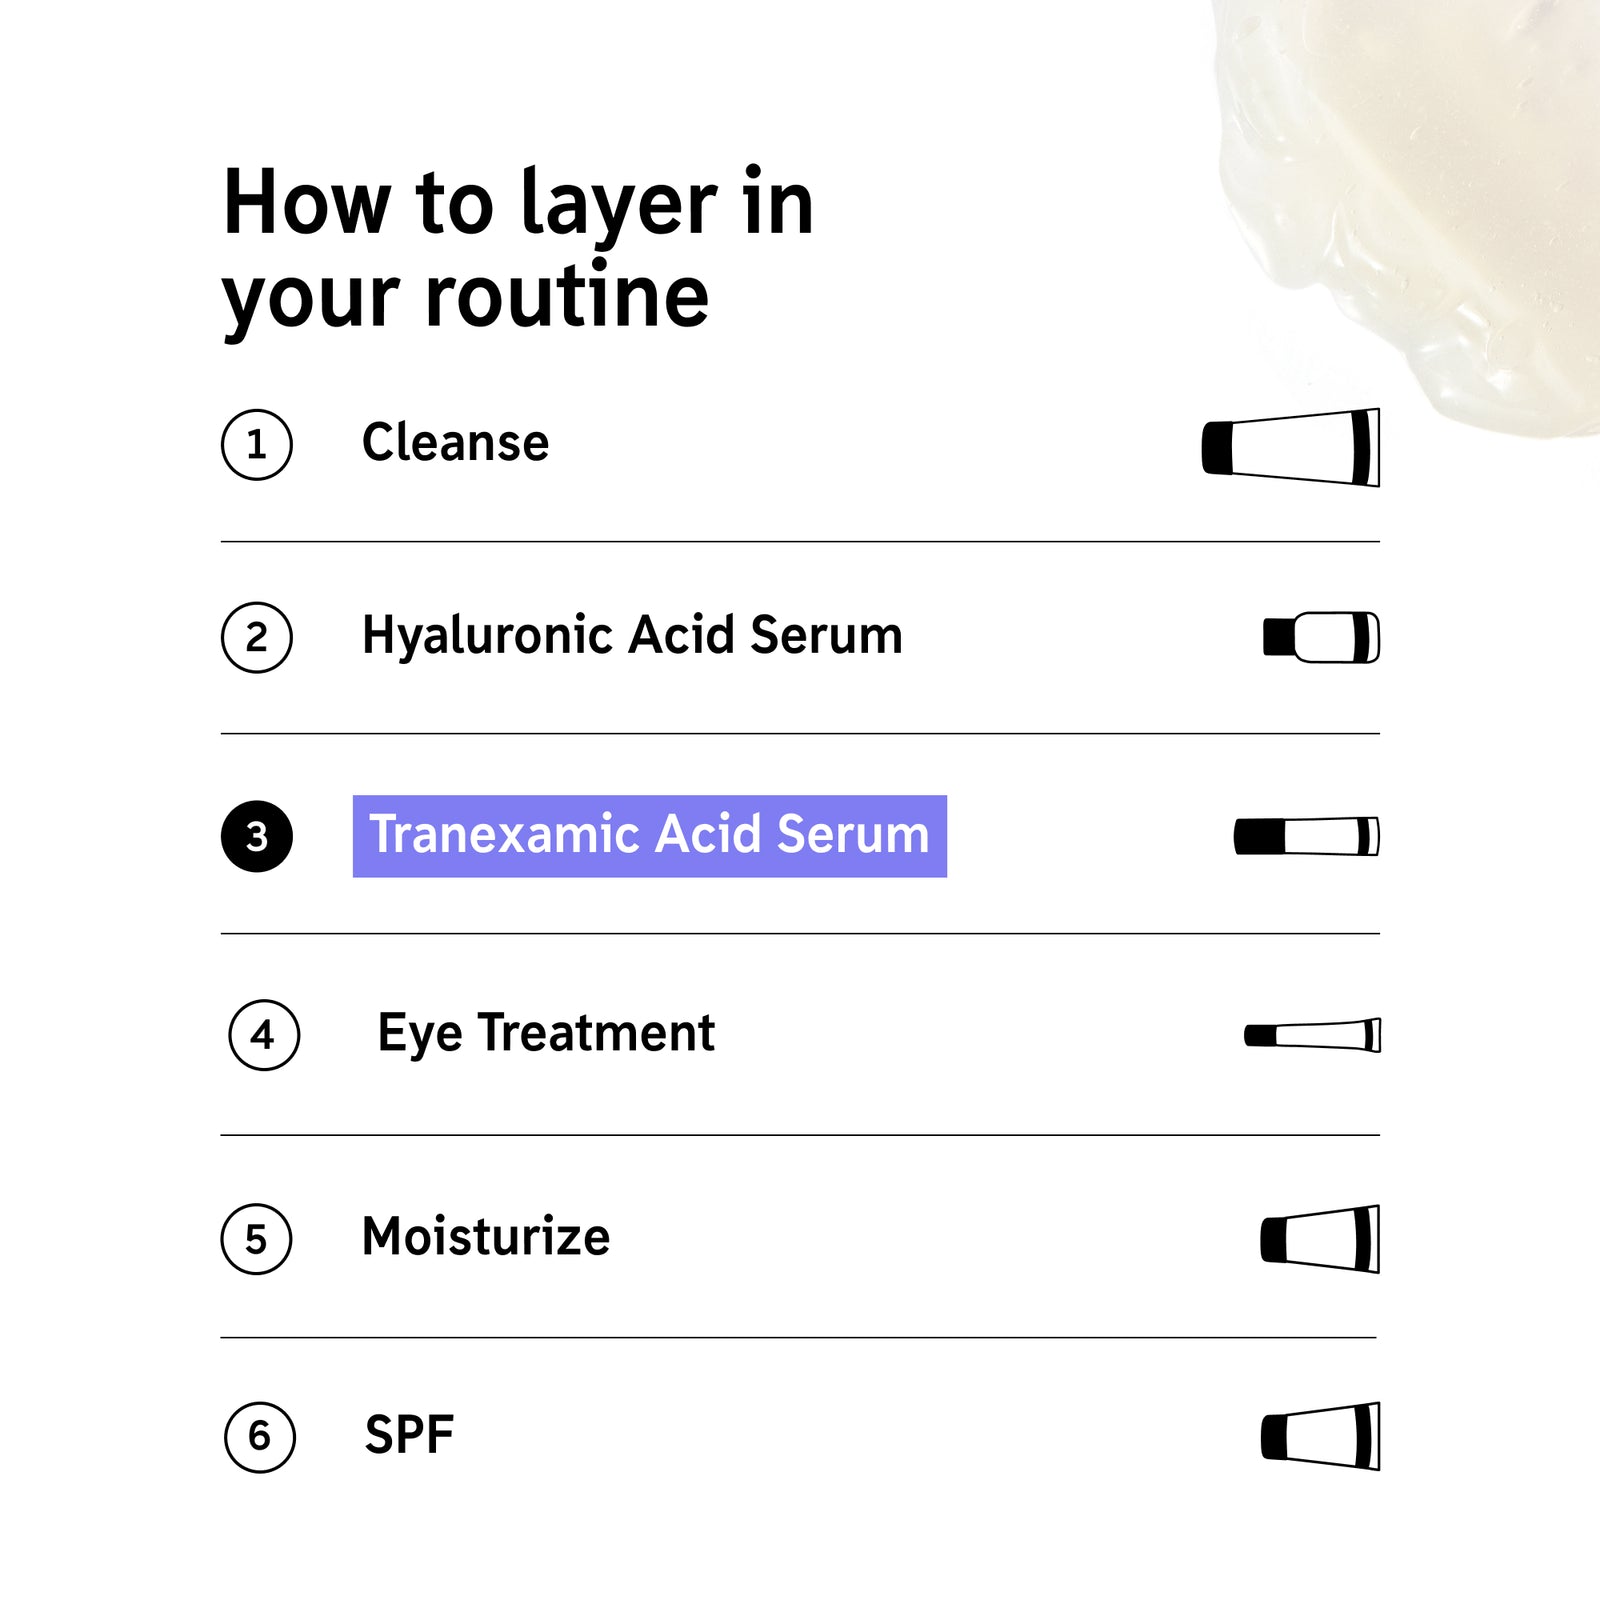 How to layer Tranexamic Acid Serum in your routine